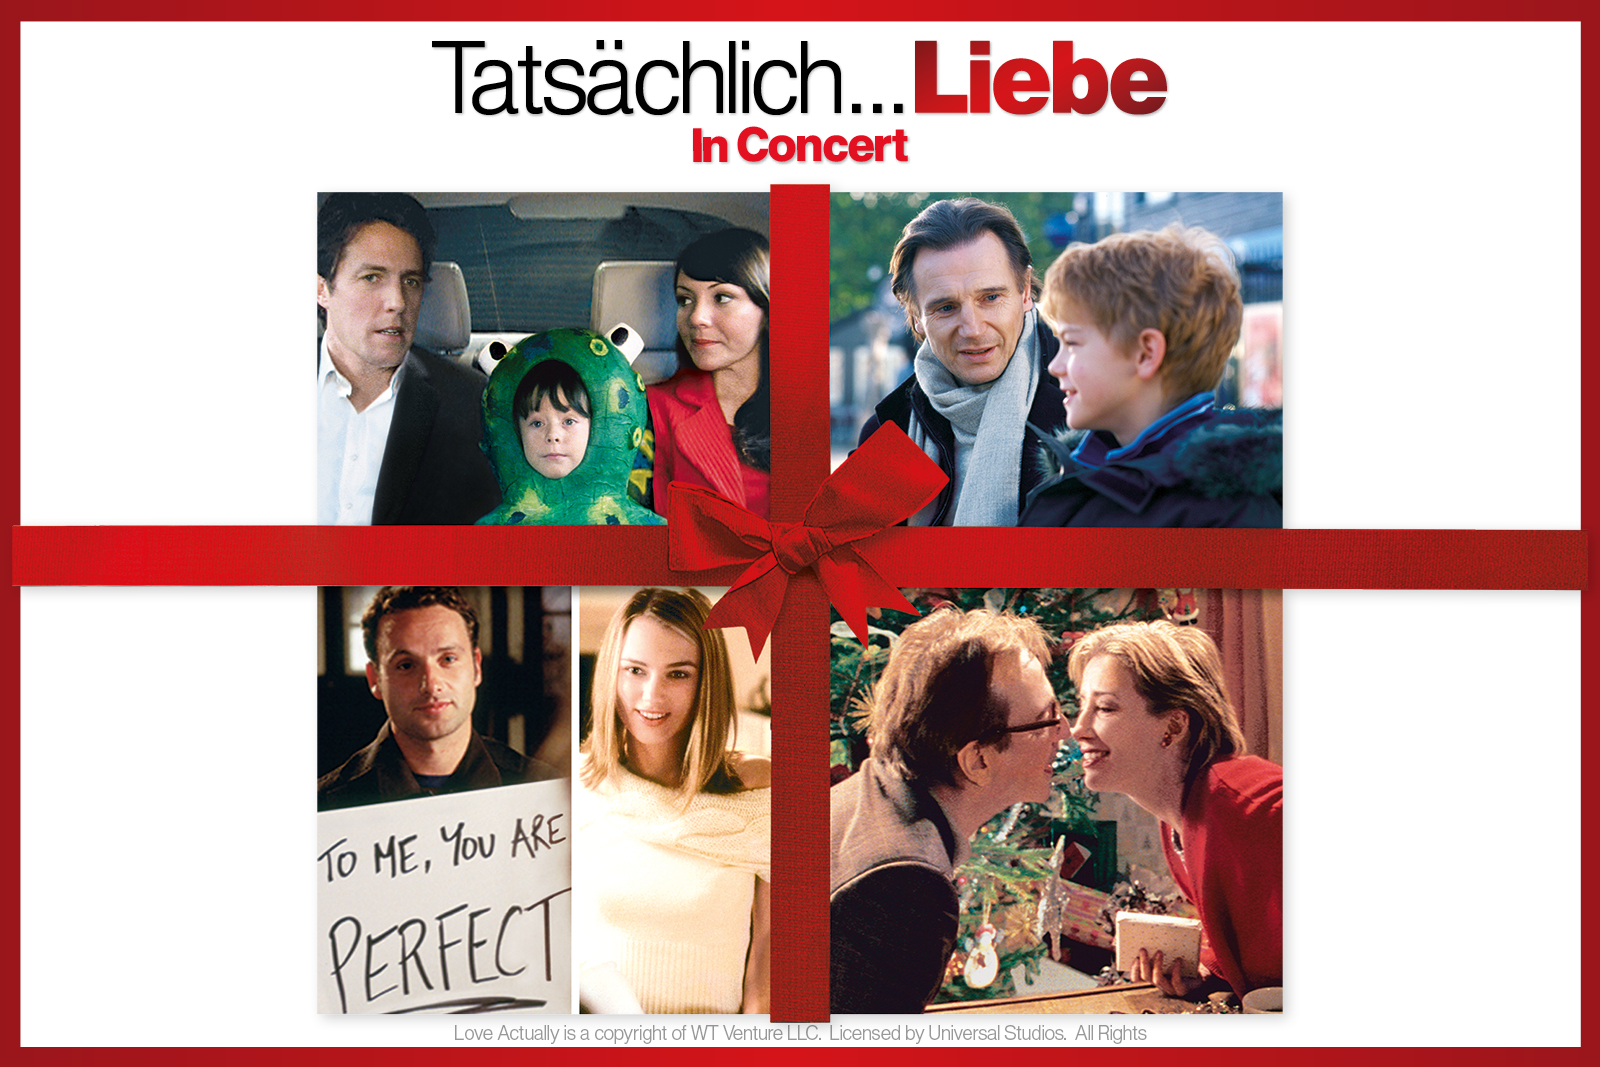 Pictured is the cover of "Love Actually": four images from the film and a red ribbon in between. 